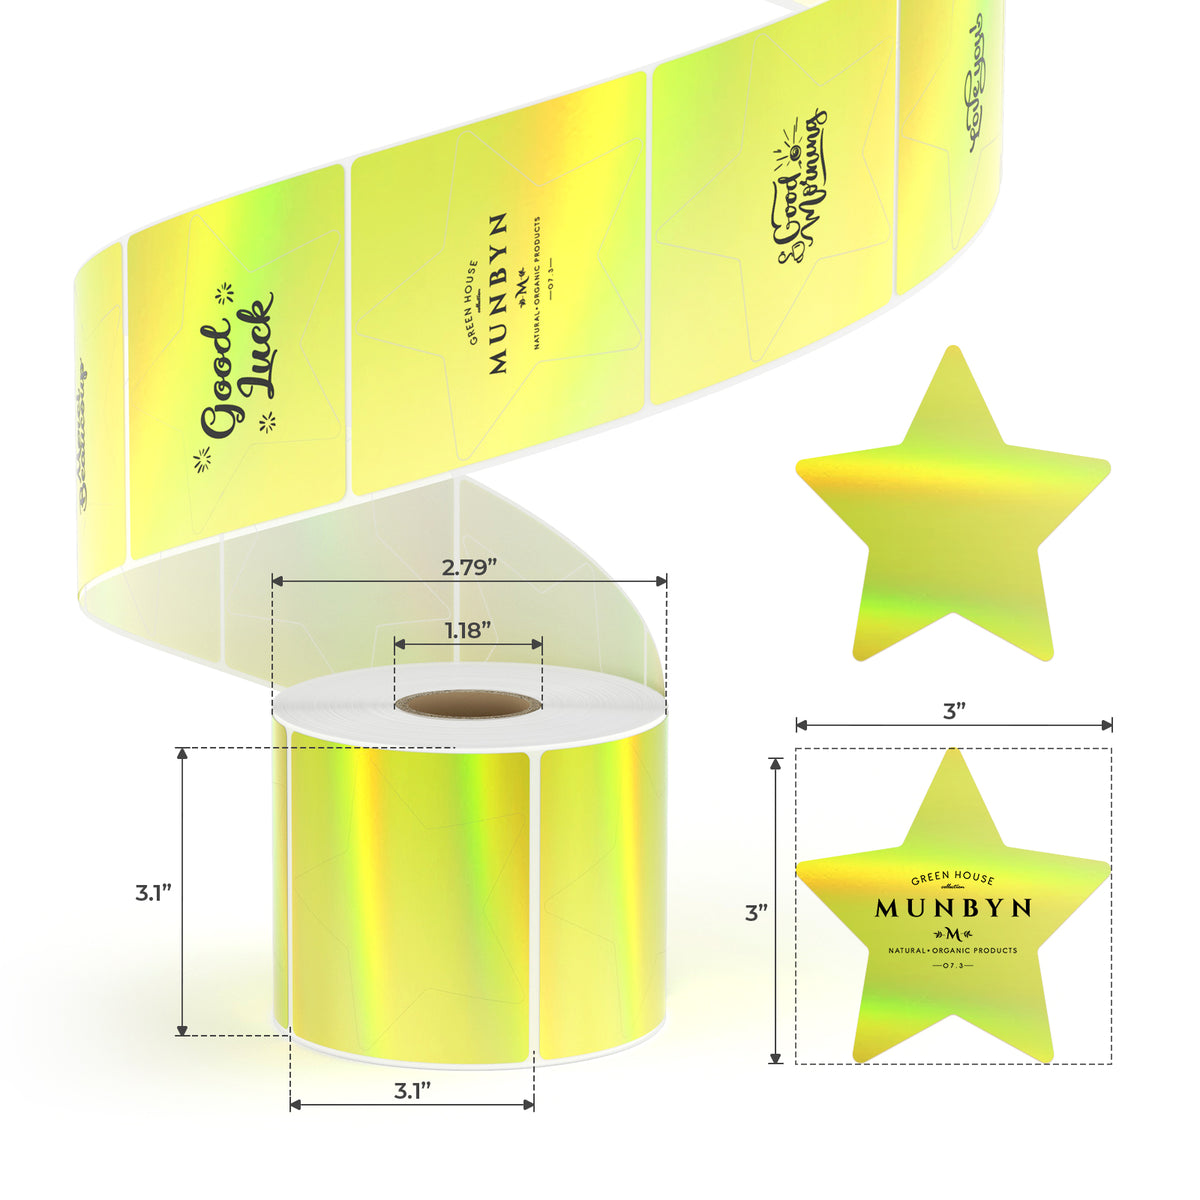 MUNBYN star gold holographic thermal labels feature 250 labels per roll, ensuring you have plenty for all your labeling needs.